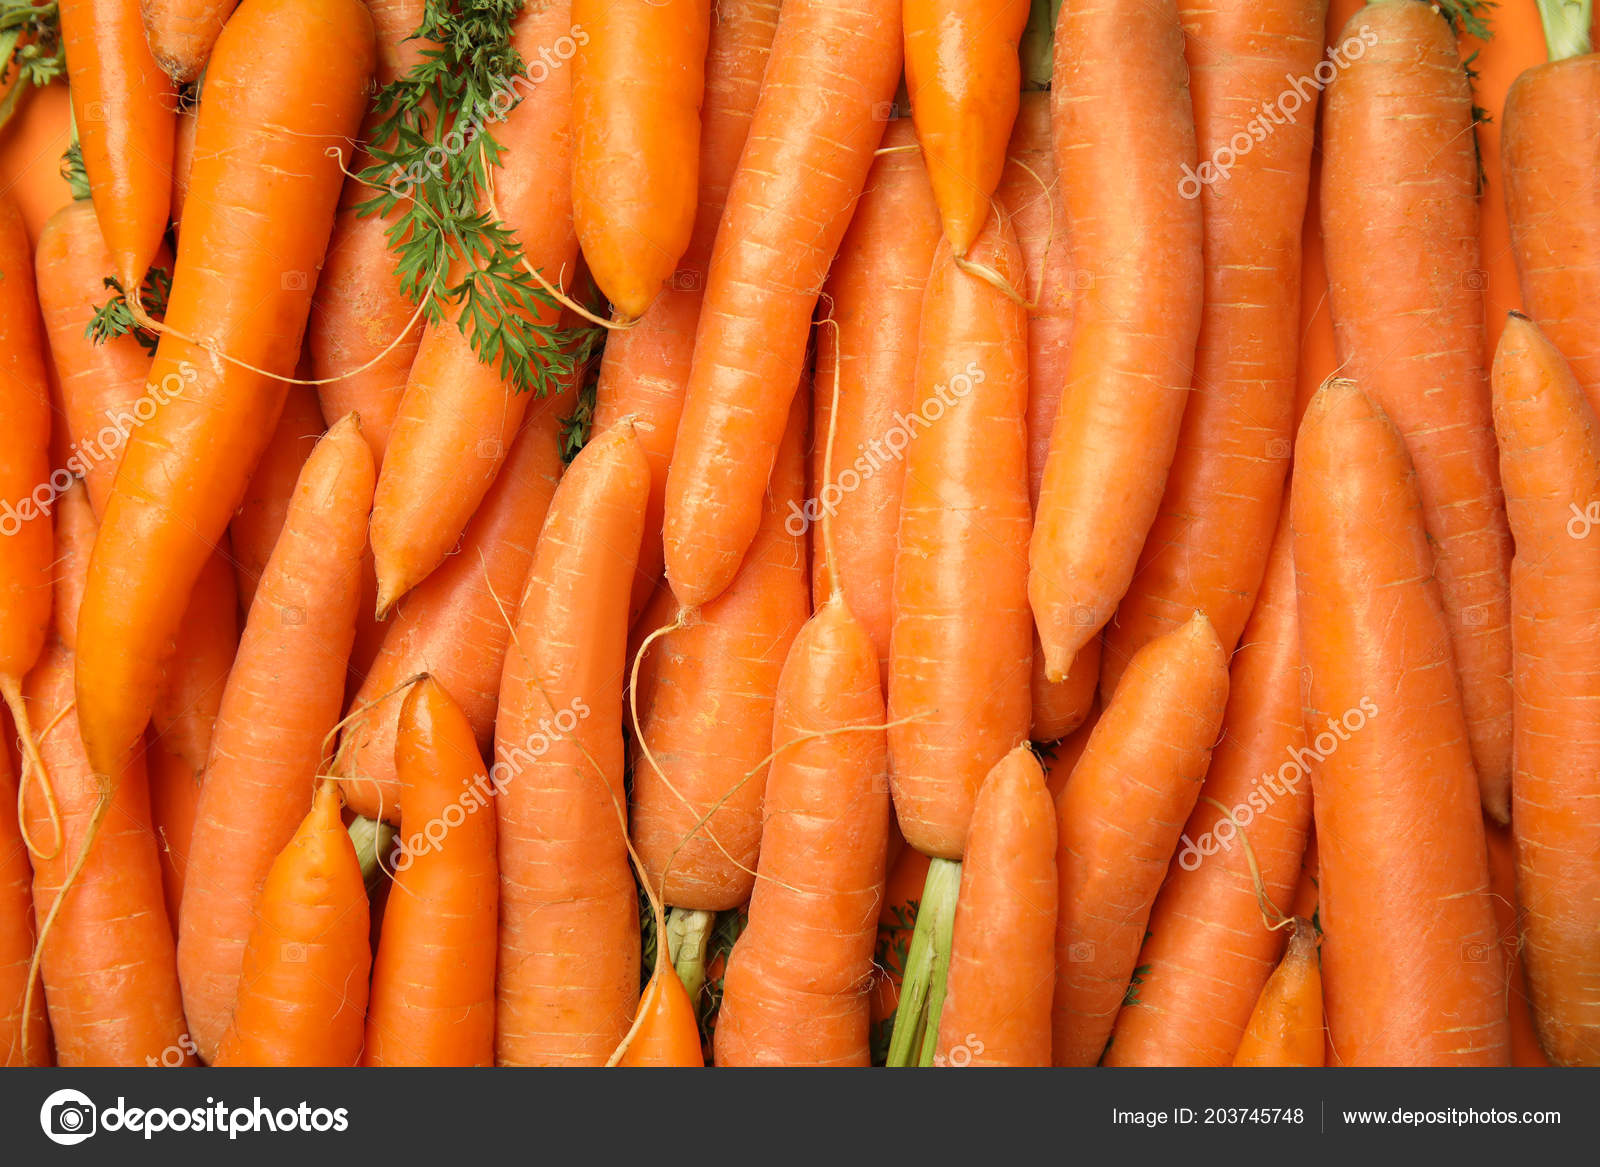 Carrot Background Royalty Free SVG Cliparts Vectors And Stock  Illustration Image 53860473